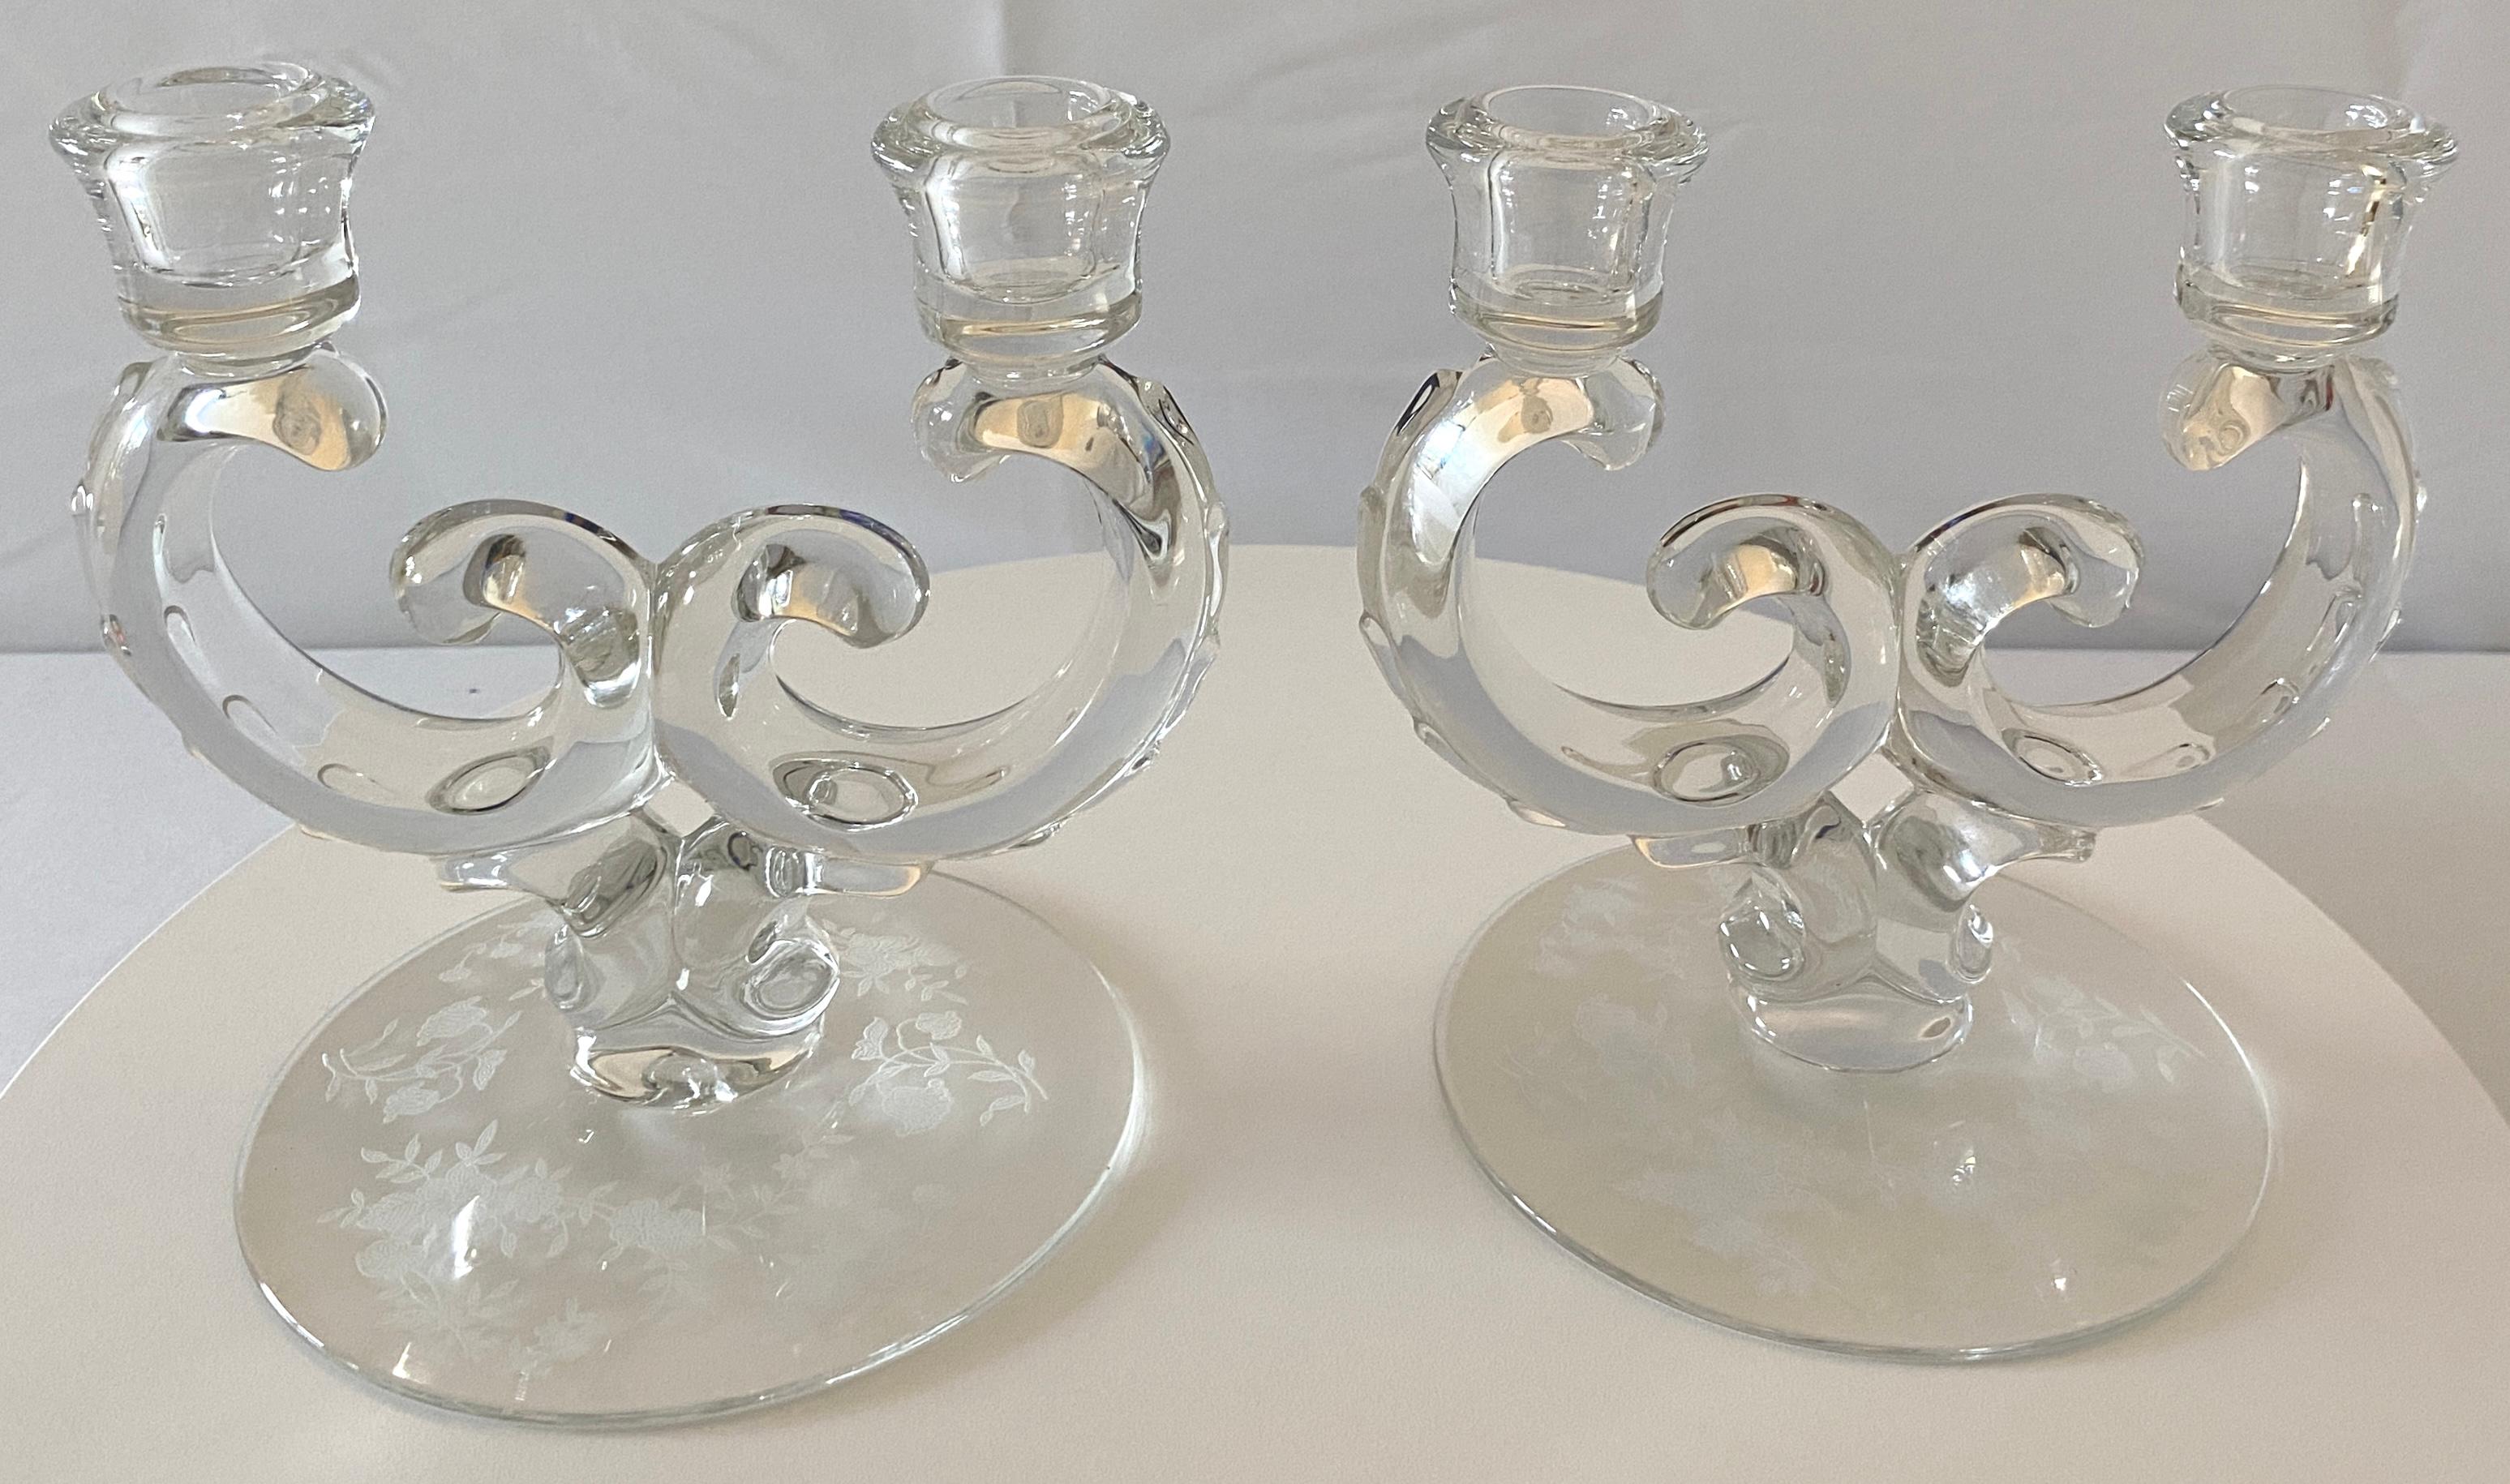 A fine quality pair of modern sculpted glass candle holders.
Eye-catching design and details. Floral etched bottoms adds a glamorous look to these sculpted glass candle holders, Italy, circa 1970.

This pair of modern sculpted glass candle holders